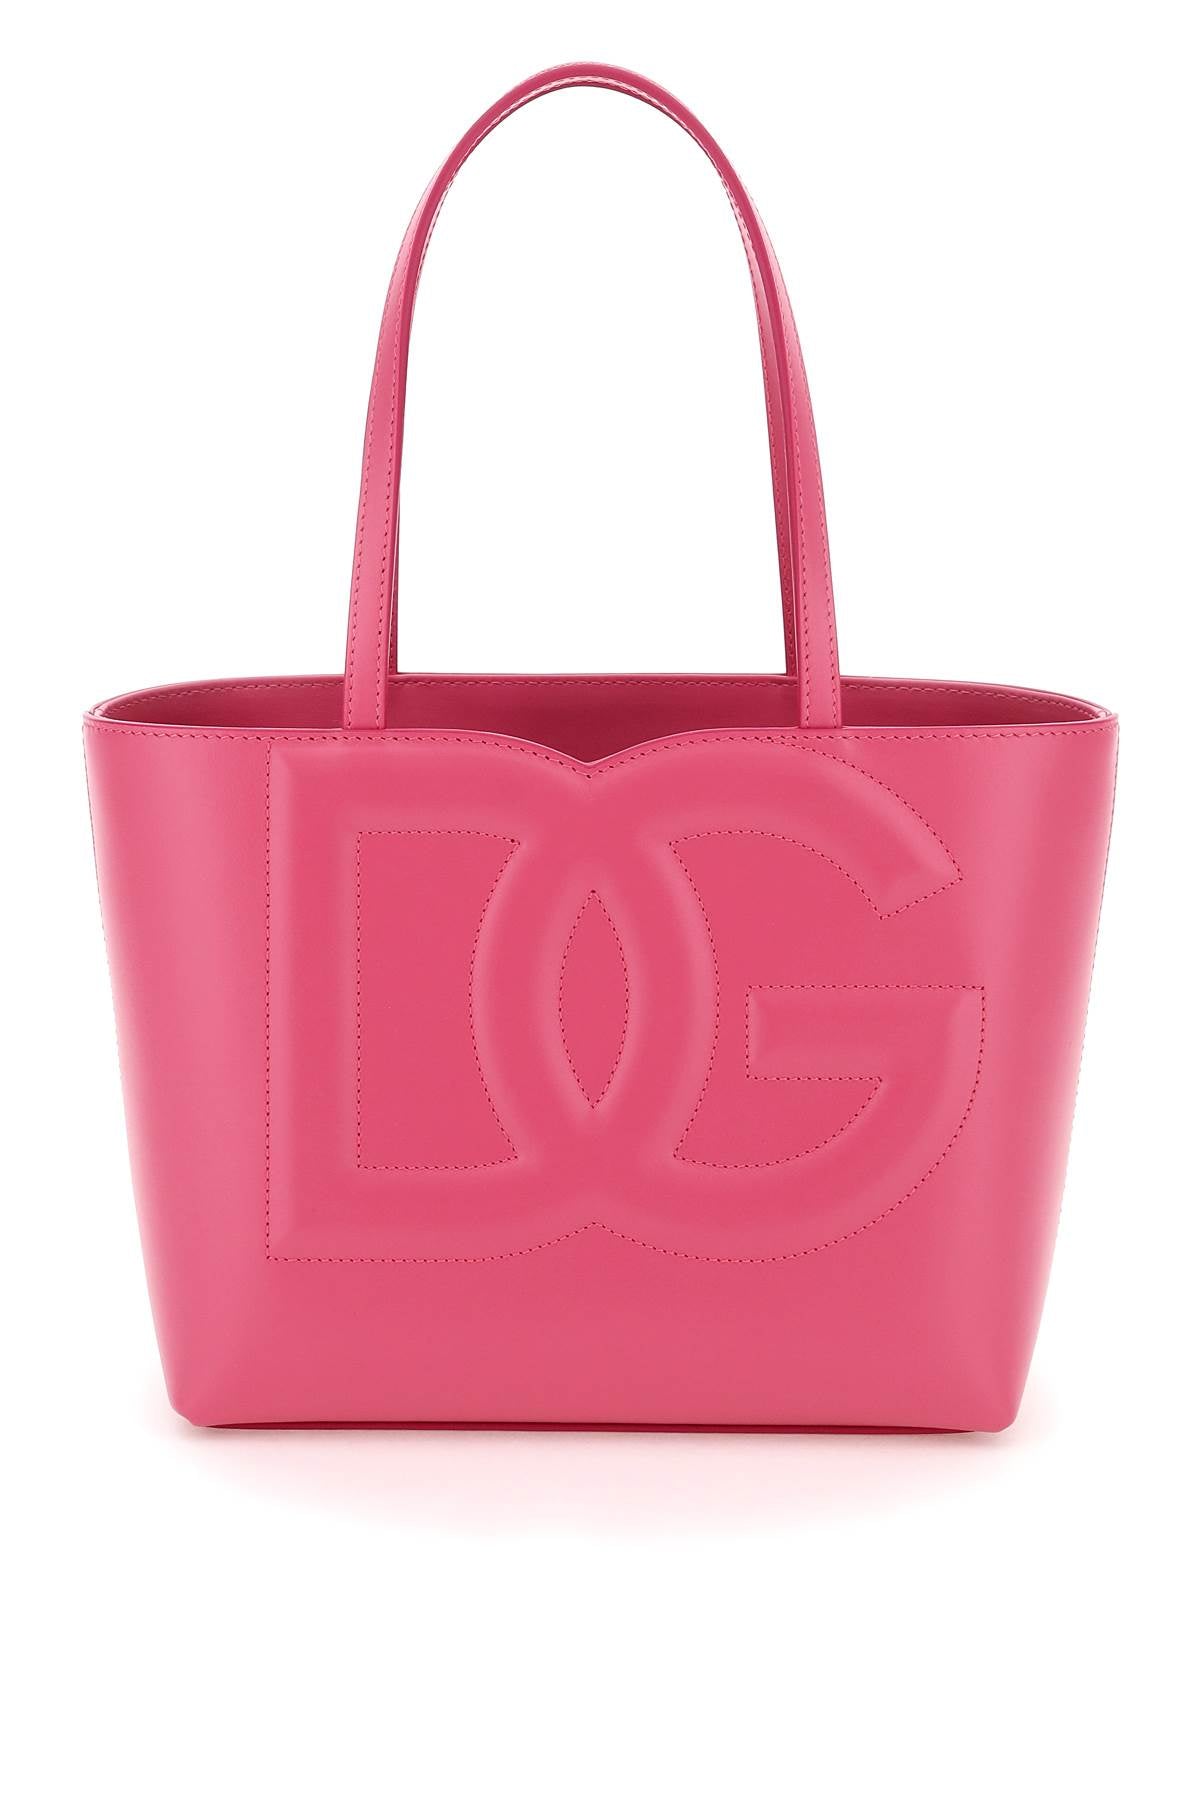 Dolce & gabbana leather tote bag-0